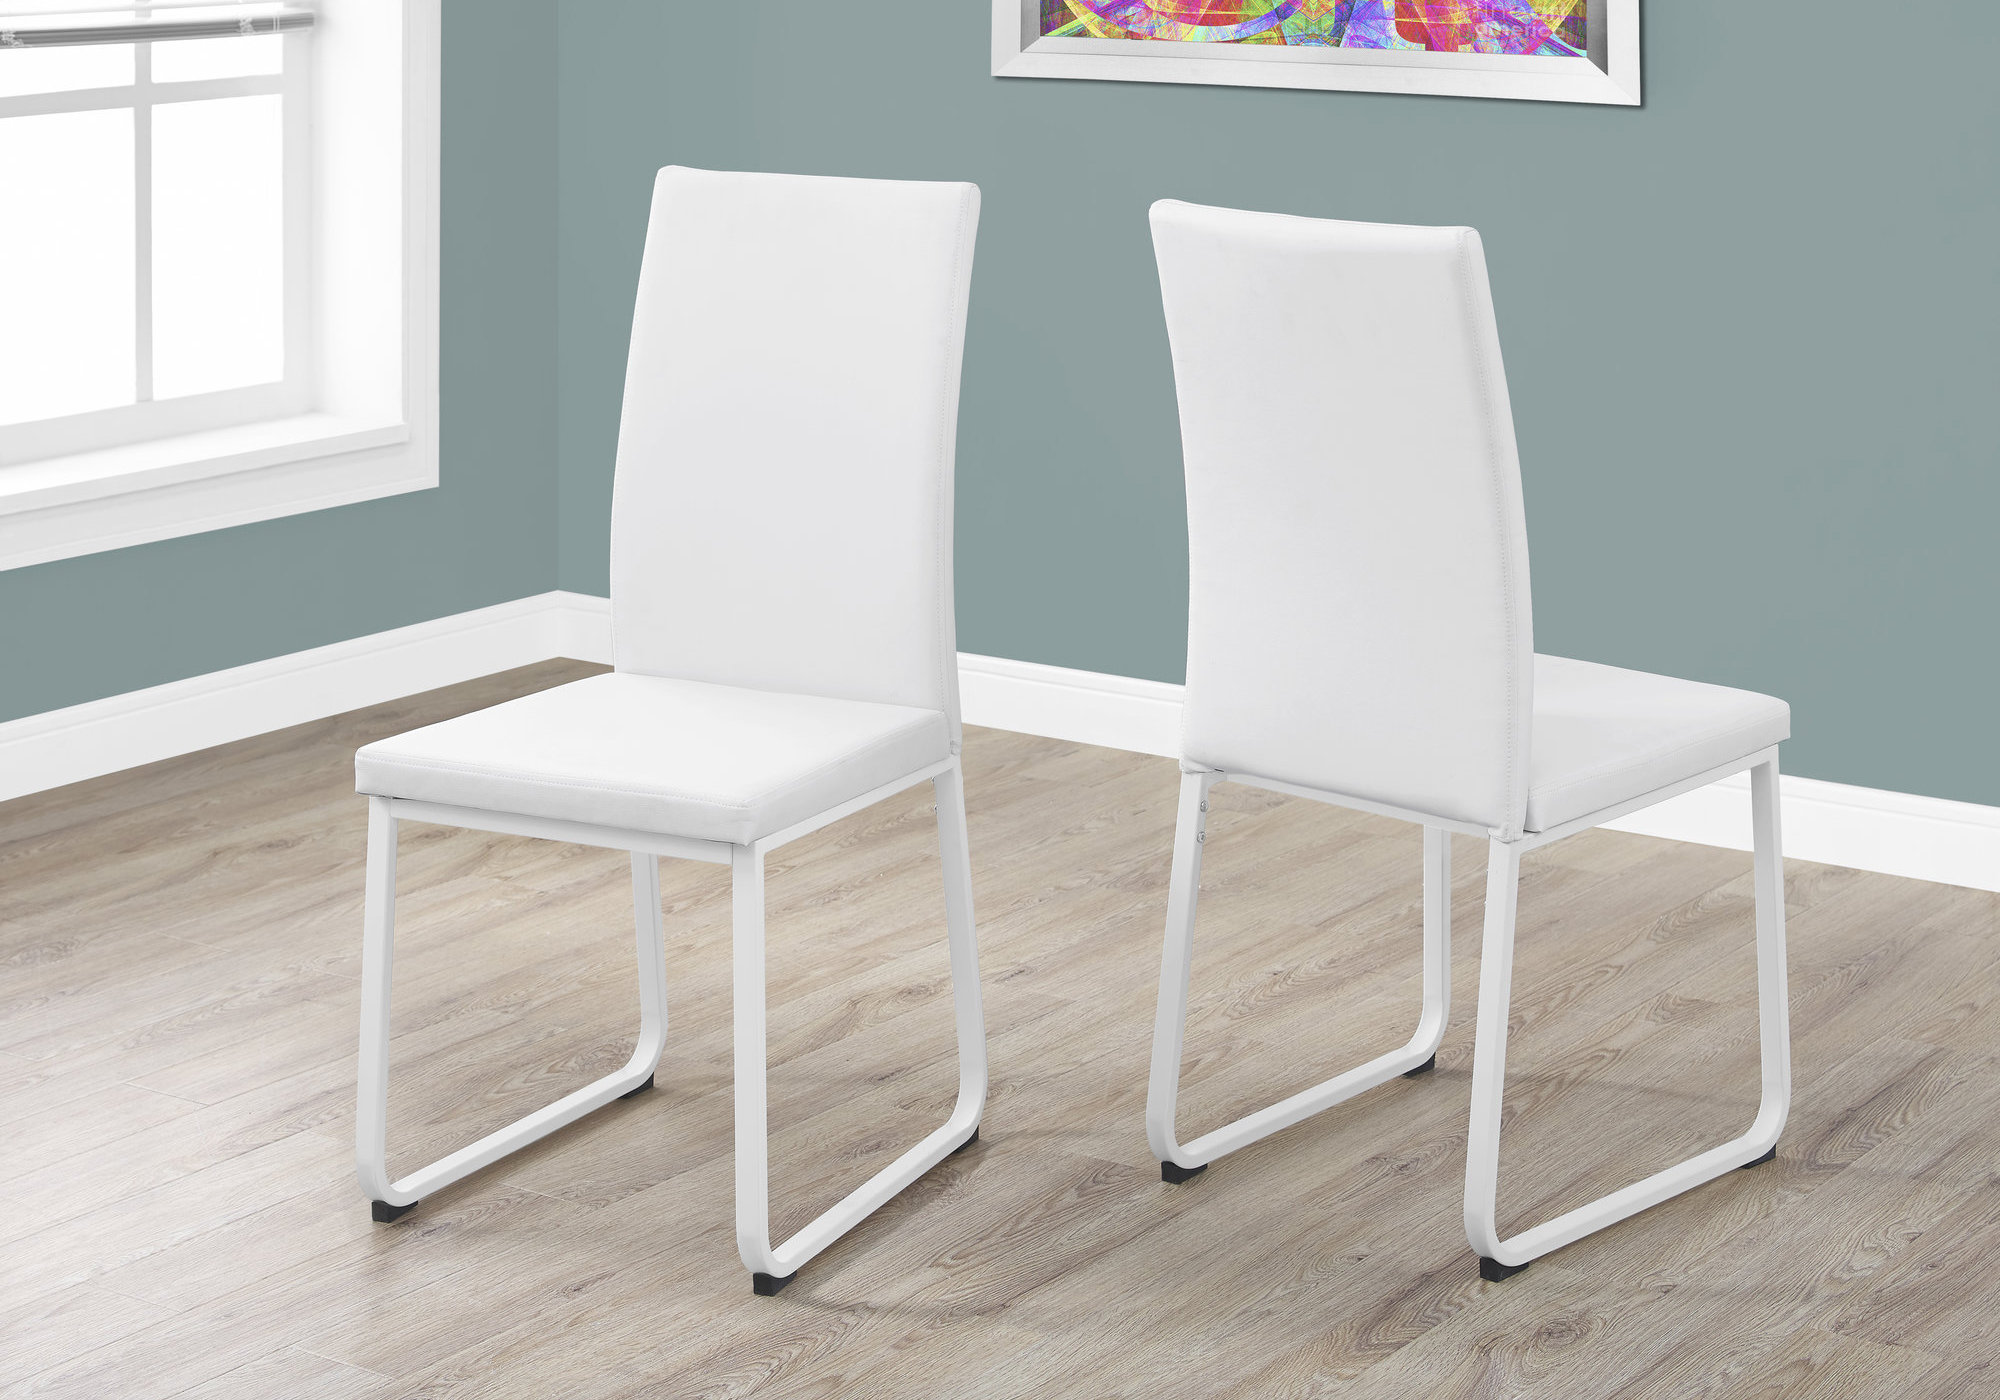 Two 38" White Leather Look Foam and Metal Dining Chairs